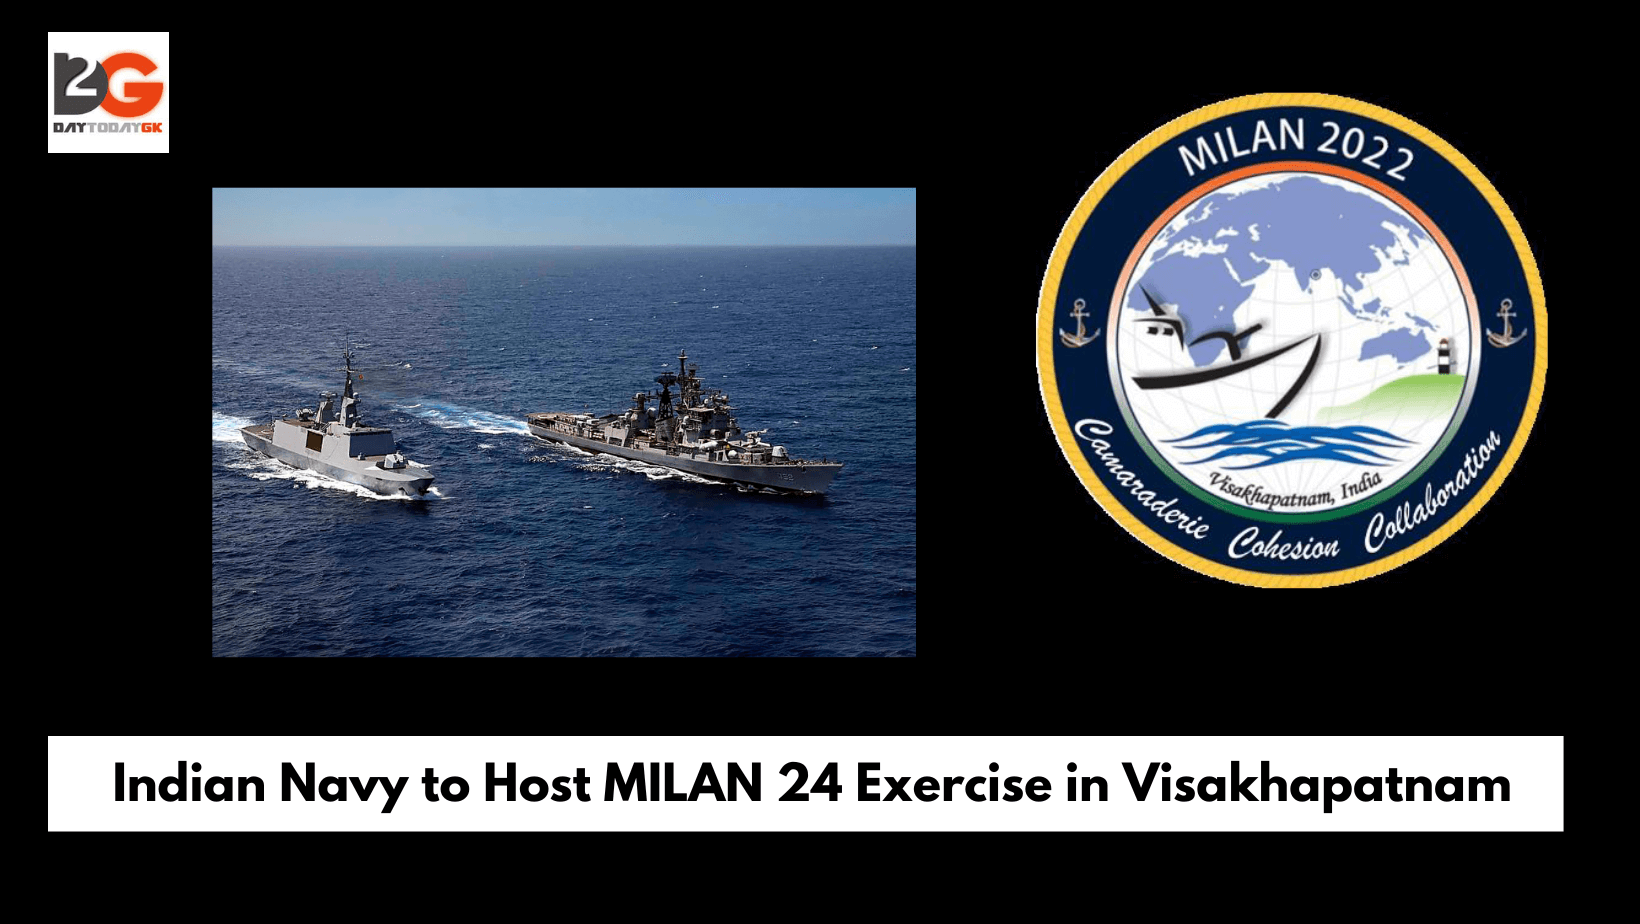 Indian Navy to Host MILAN 24 Exercise in Visakhapatnam